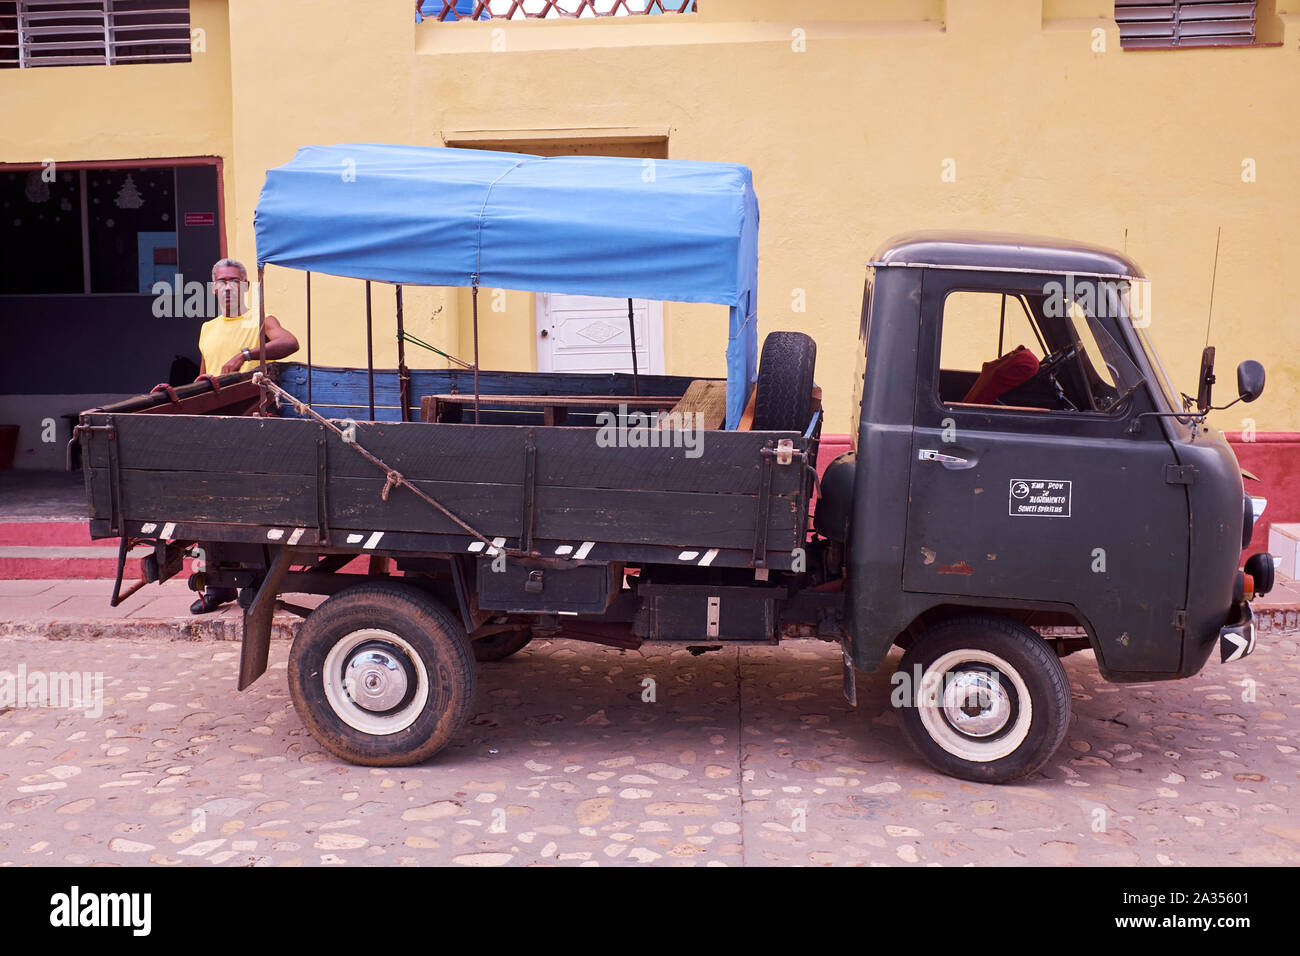 An old pick-up truck in Trinidad, Cuba Stock Photo